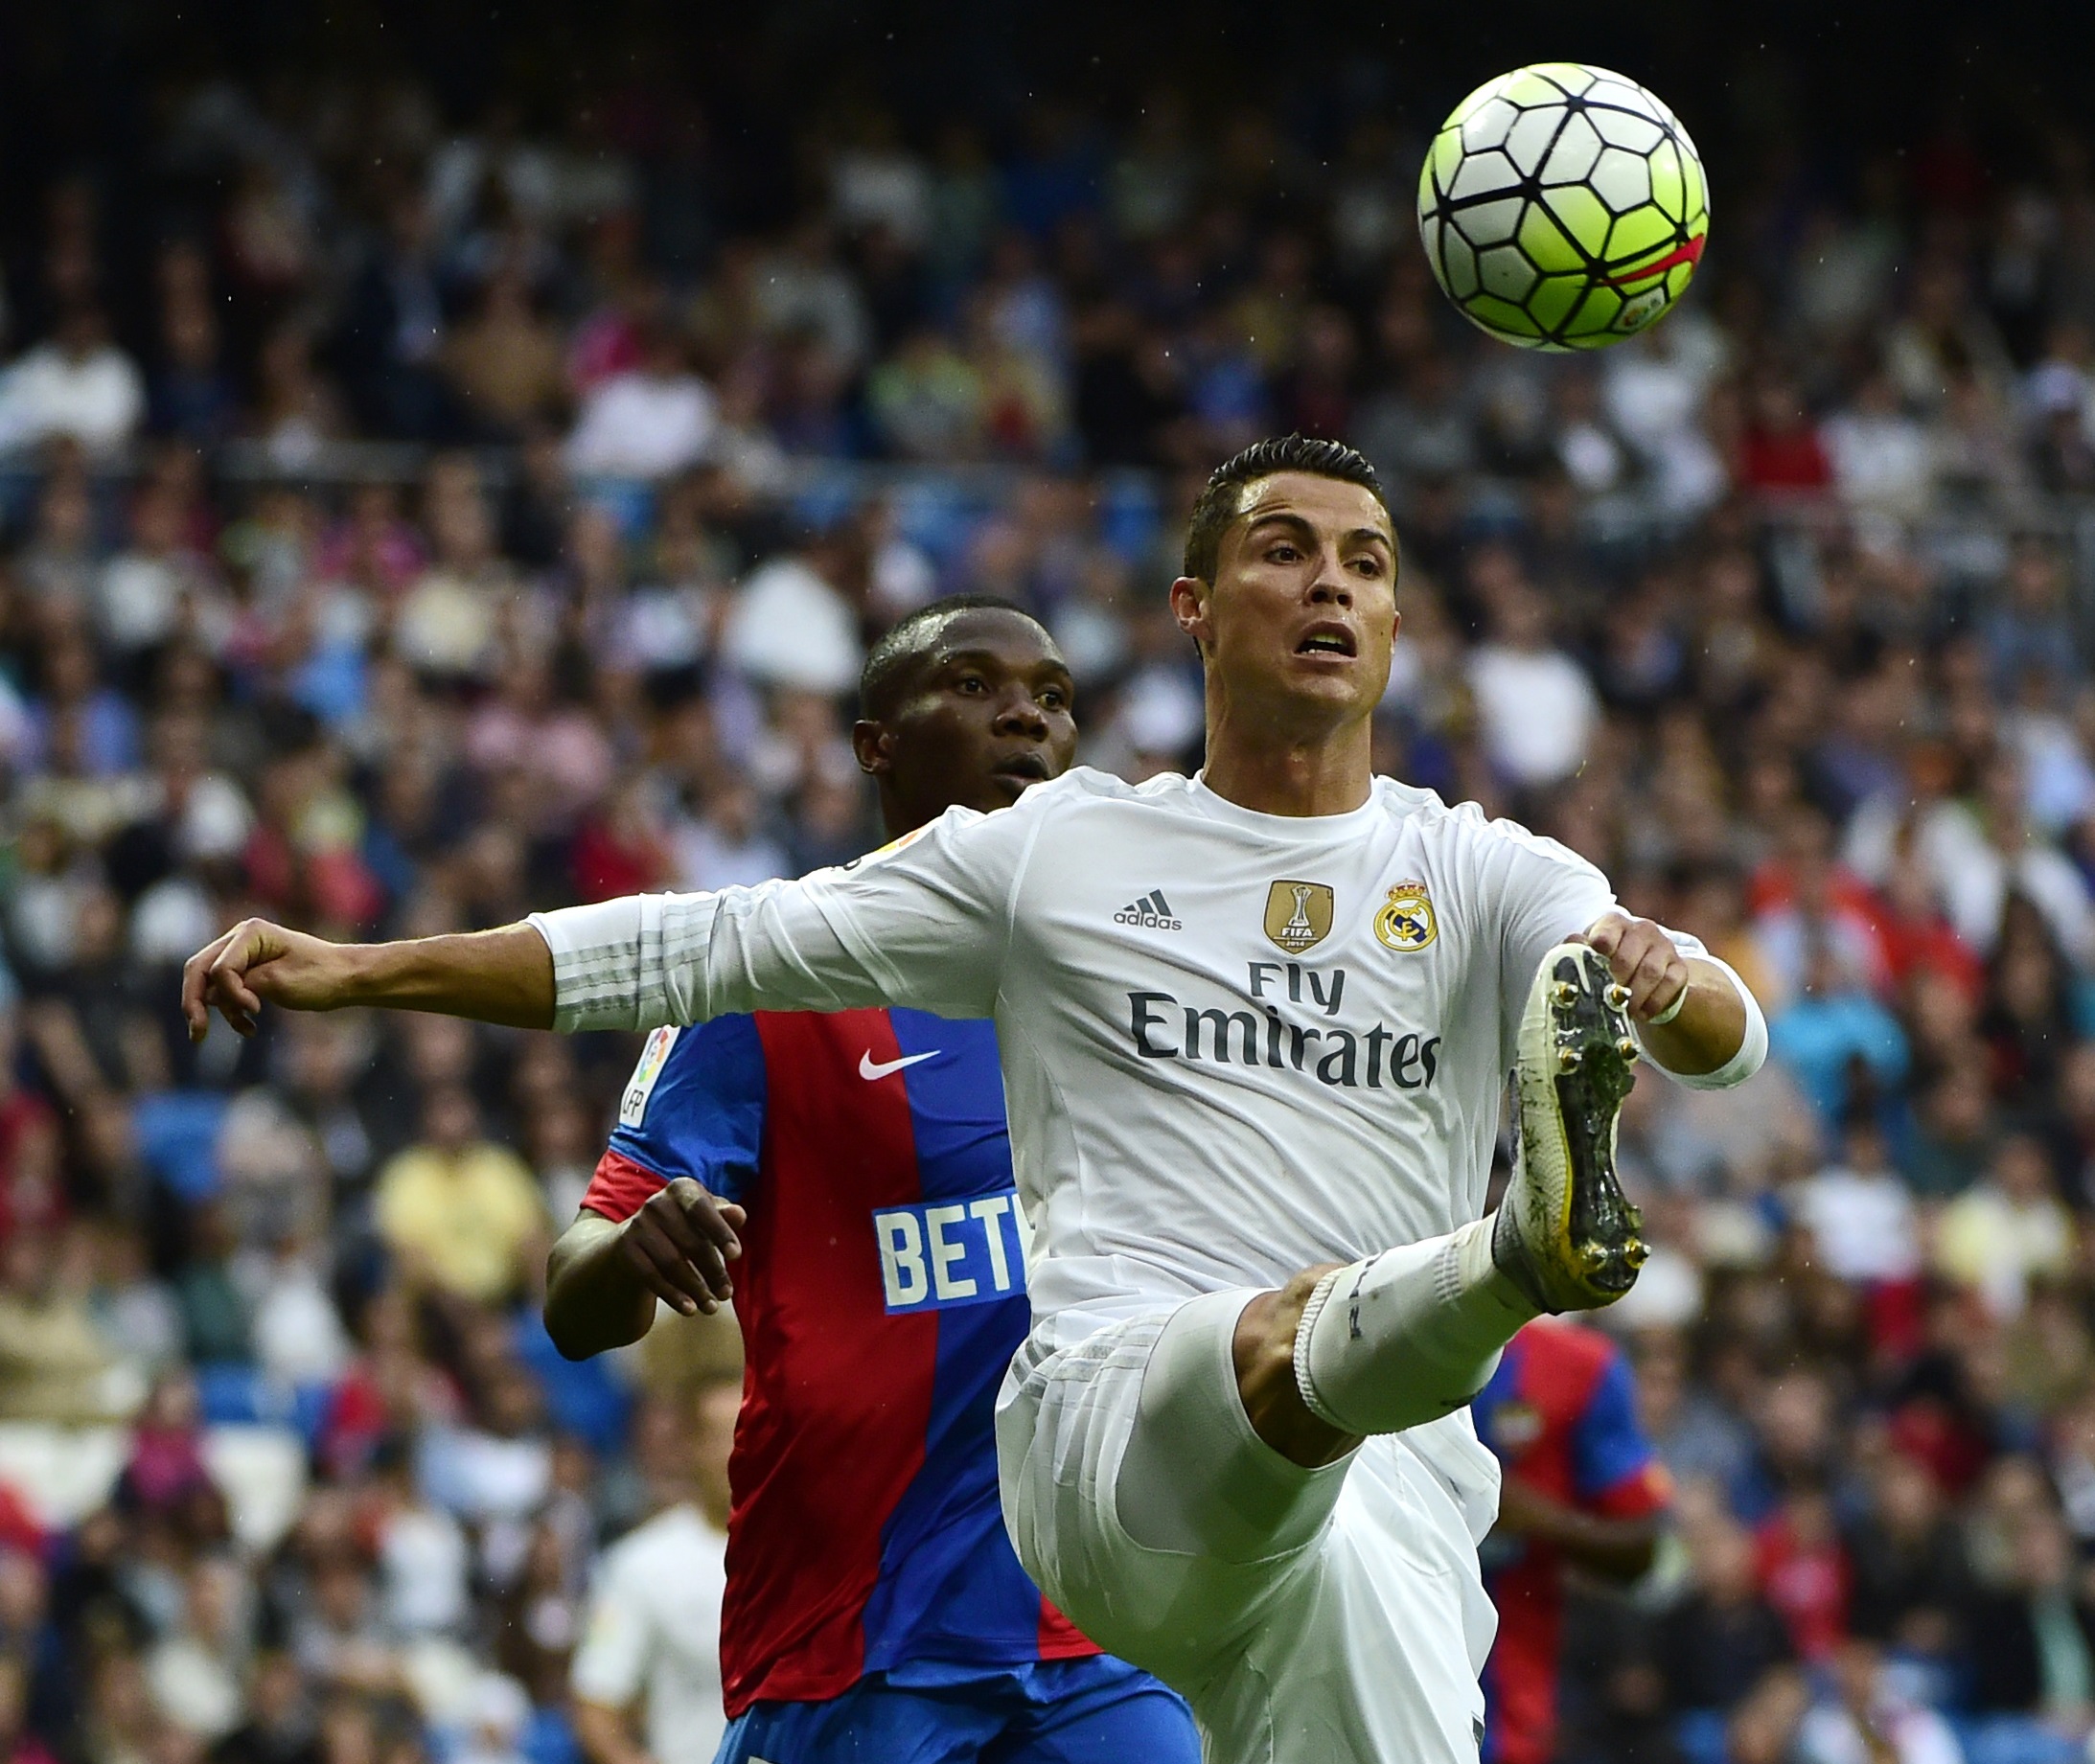 Real Madrid's Portuguese forward Cristiano Ronaldo (R) vies with Levante's Mozambican midfielder Simao during the Spanish league football match Real Madrid CF vs Levante UD at the Santiago Bernabeu stadium in Madrid on October 17, 2015. AFP PHOTO/ PIERRE-PHILIPPE MARCOU